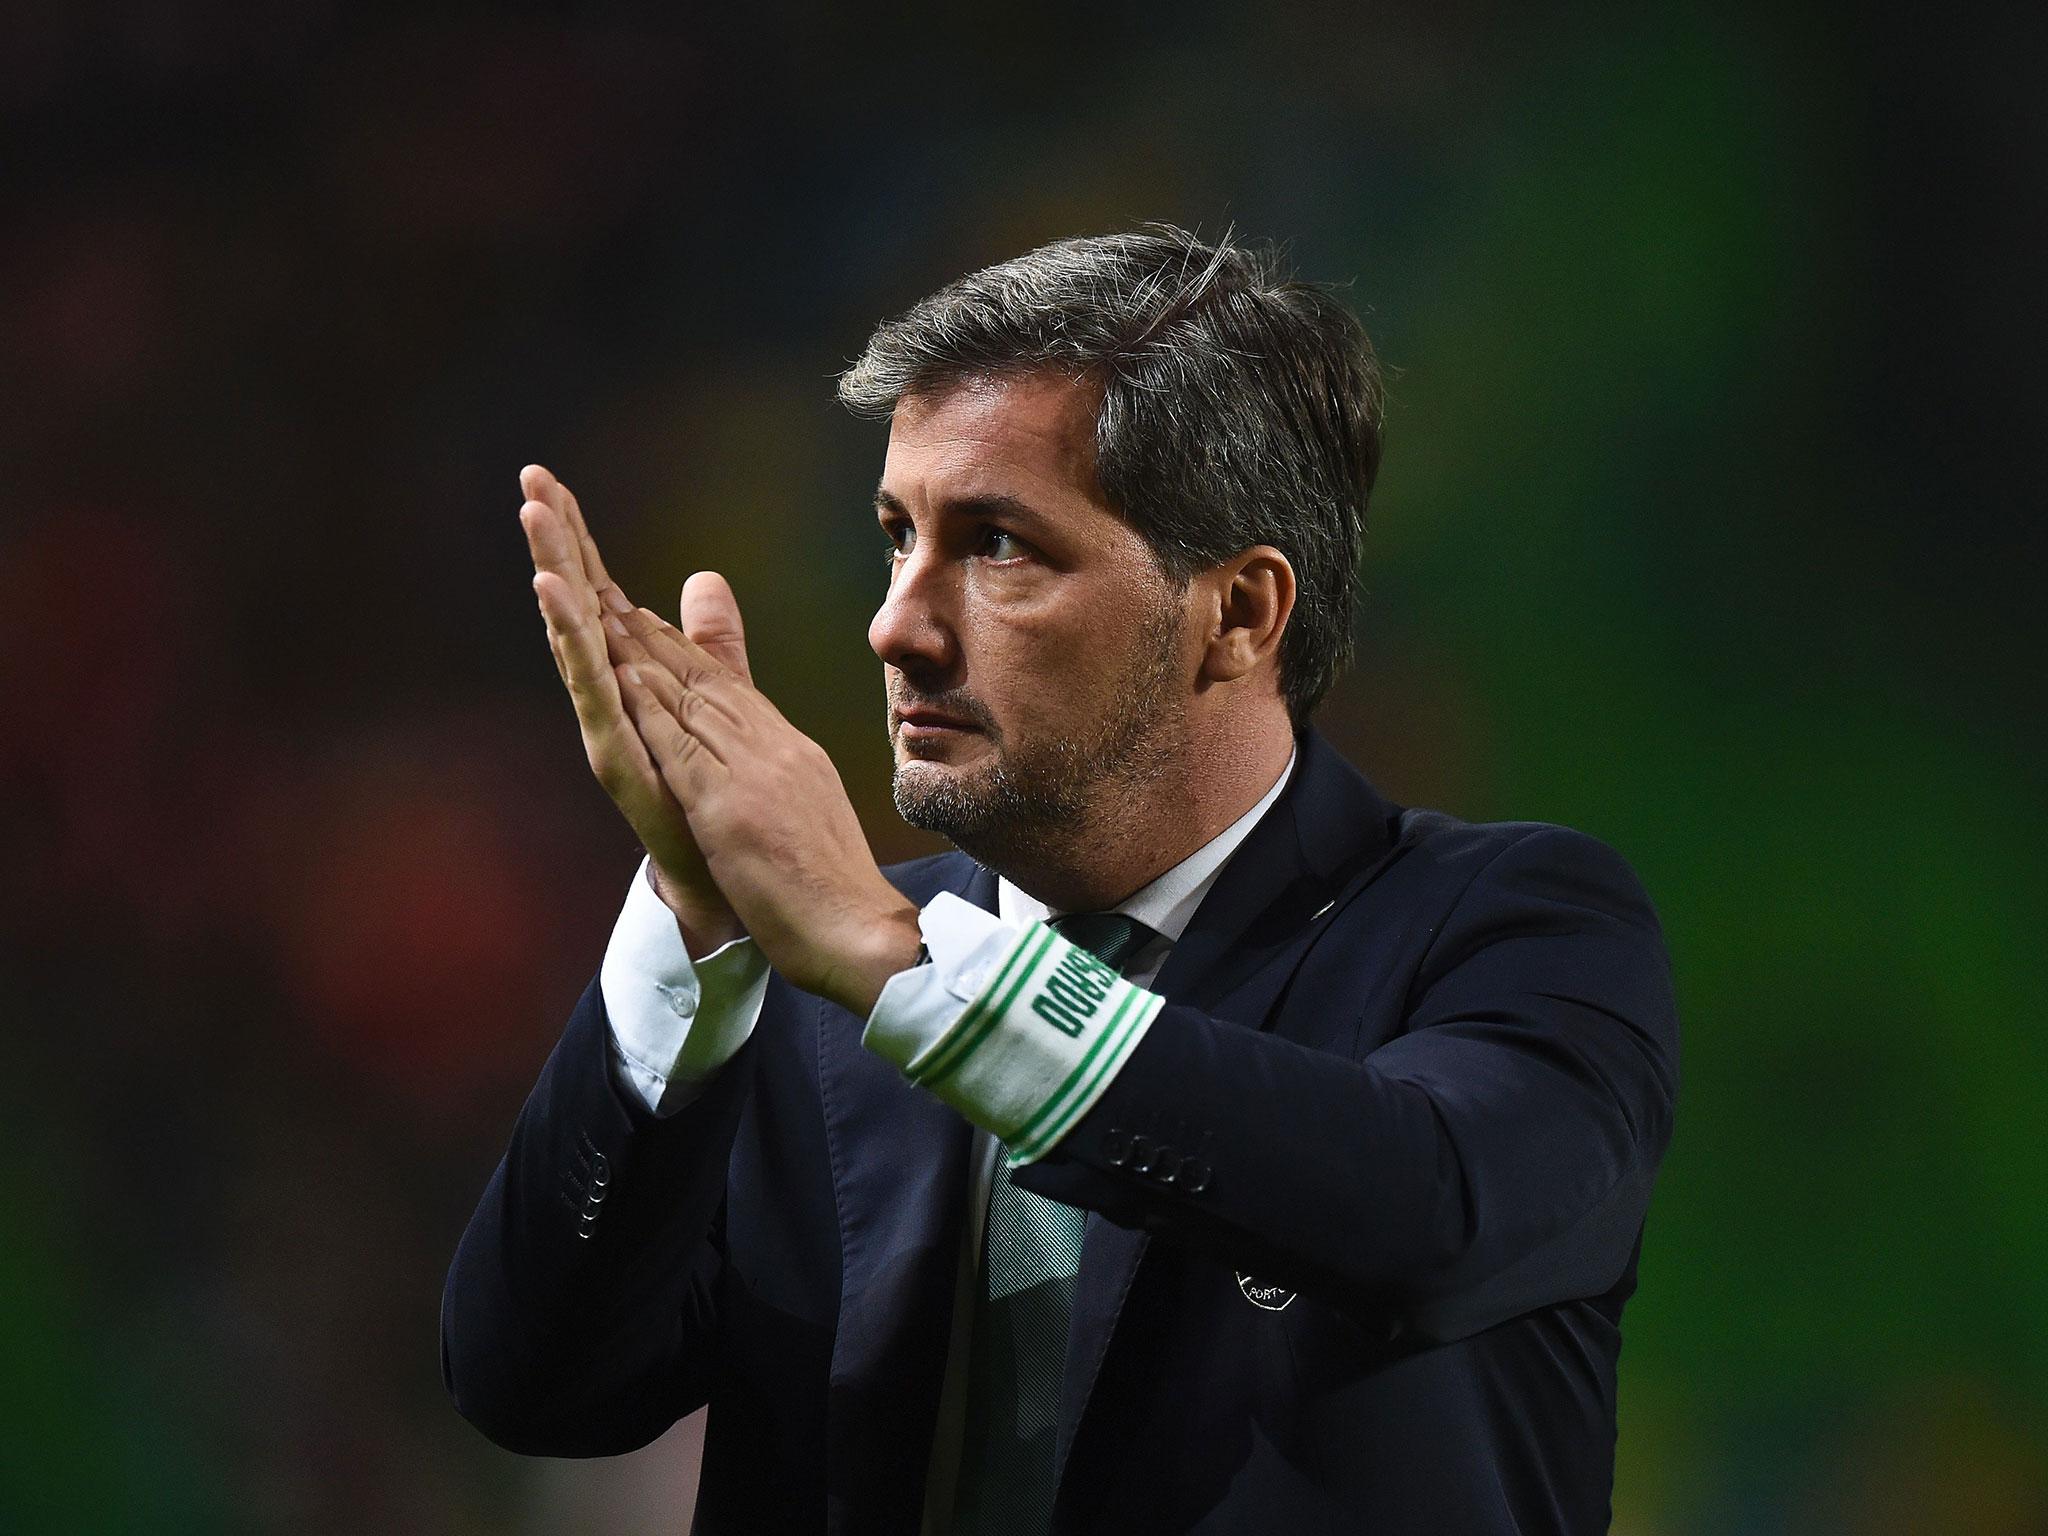 De Carvalho has divided the sport within Portugual